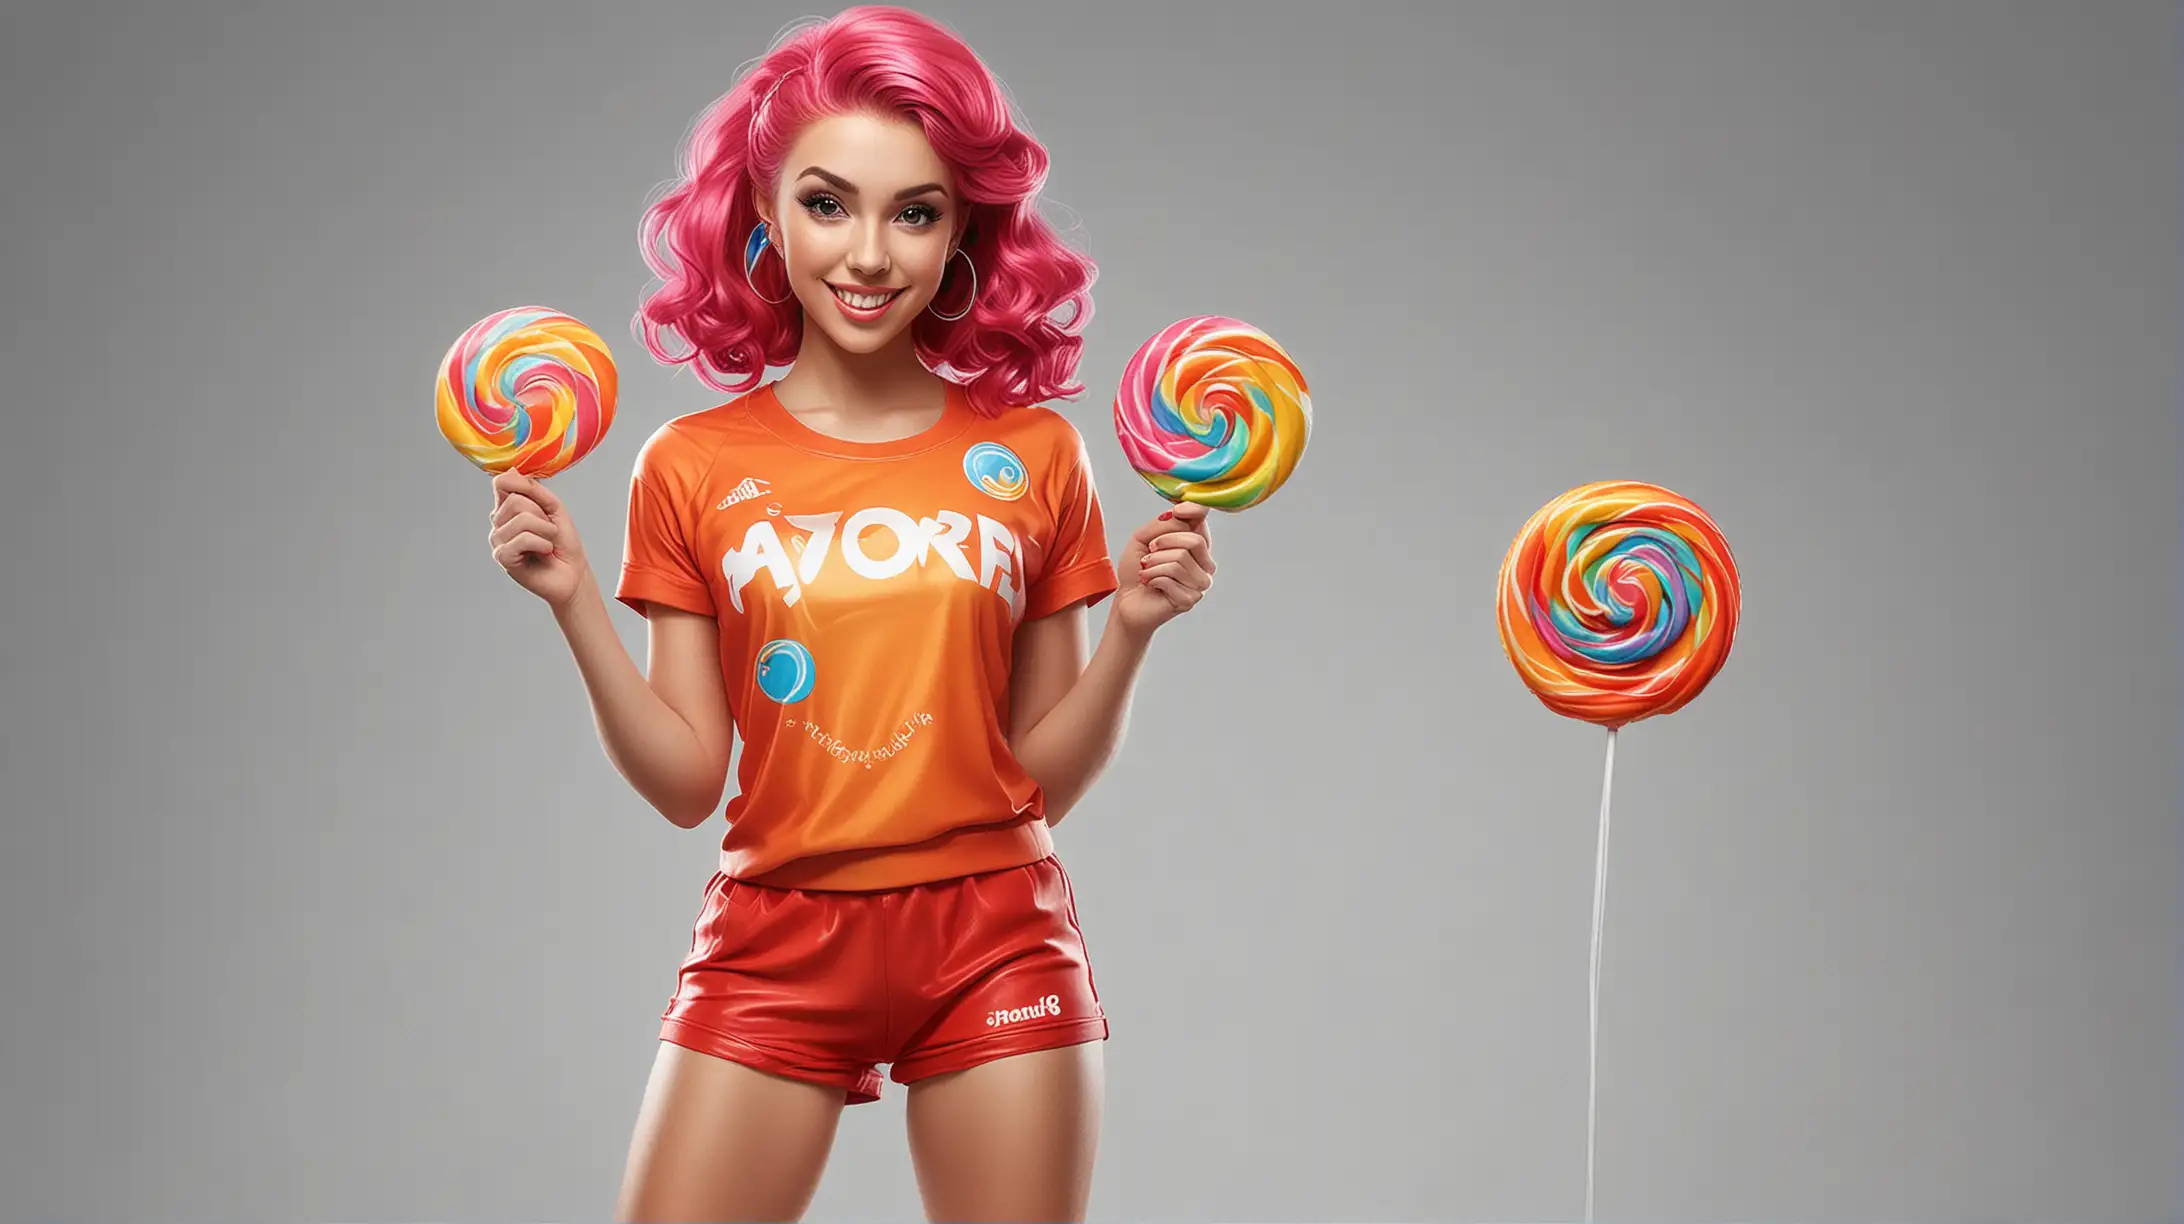 Create a full-body image of a 24 year old female mascot blending a personified, colorful lollipop head with an attractive, fit human figure. She should have realistic facial features, dressed in modern gym attire, reflecting contemporary beauty standards. The design should balance realism with playful, candy-inspired elements, suitable for a vibrant digital agency.